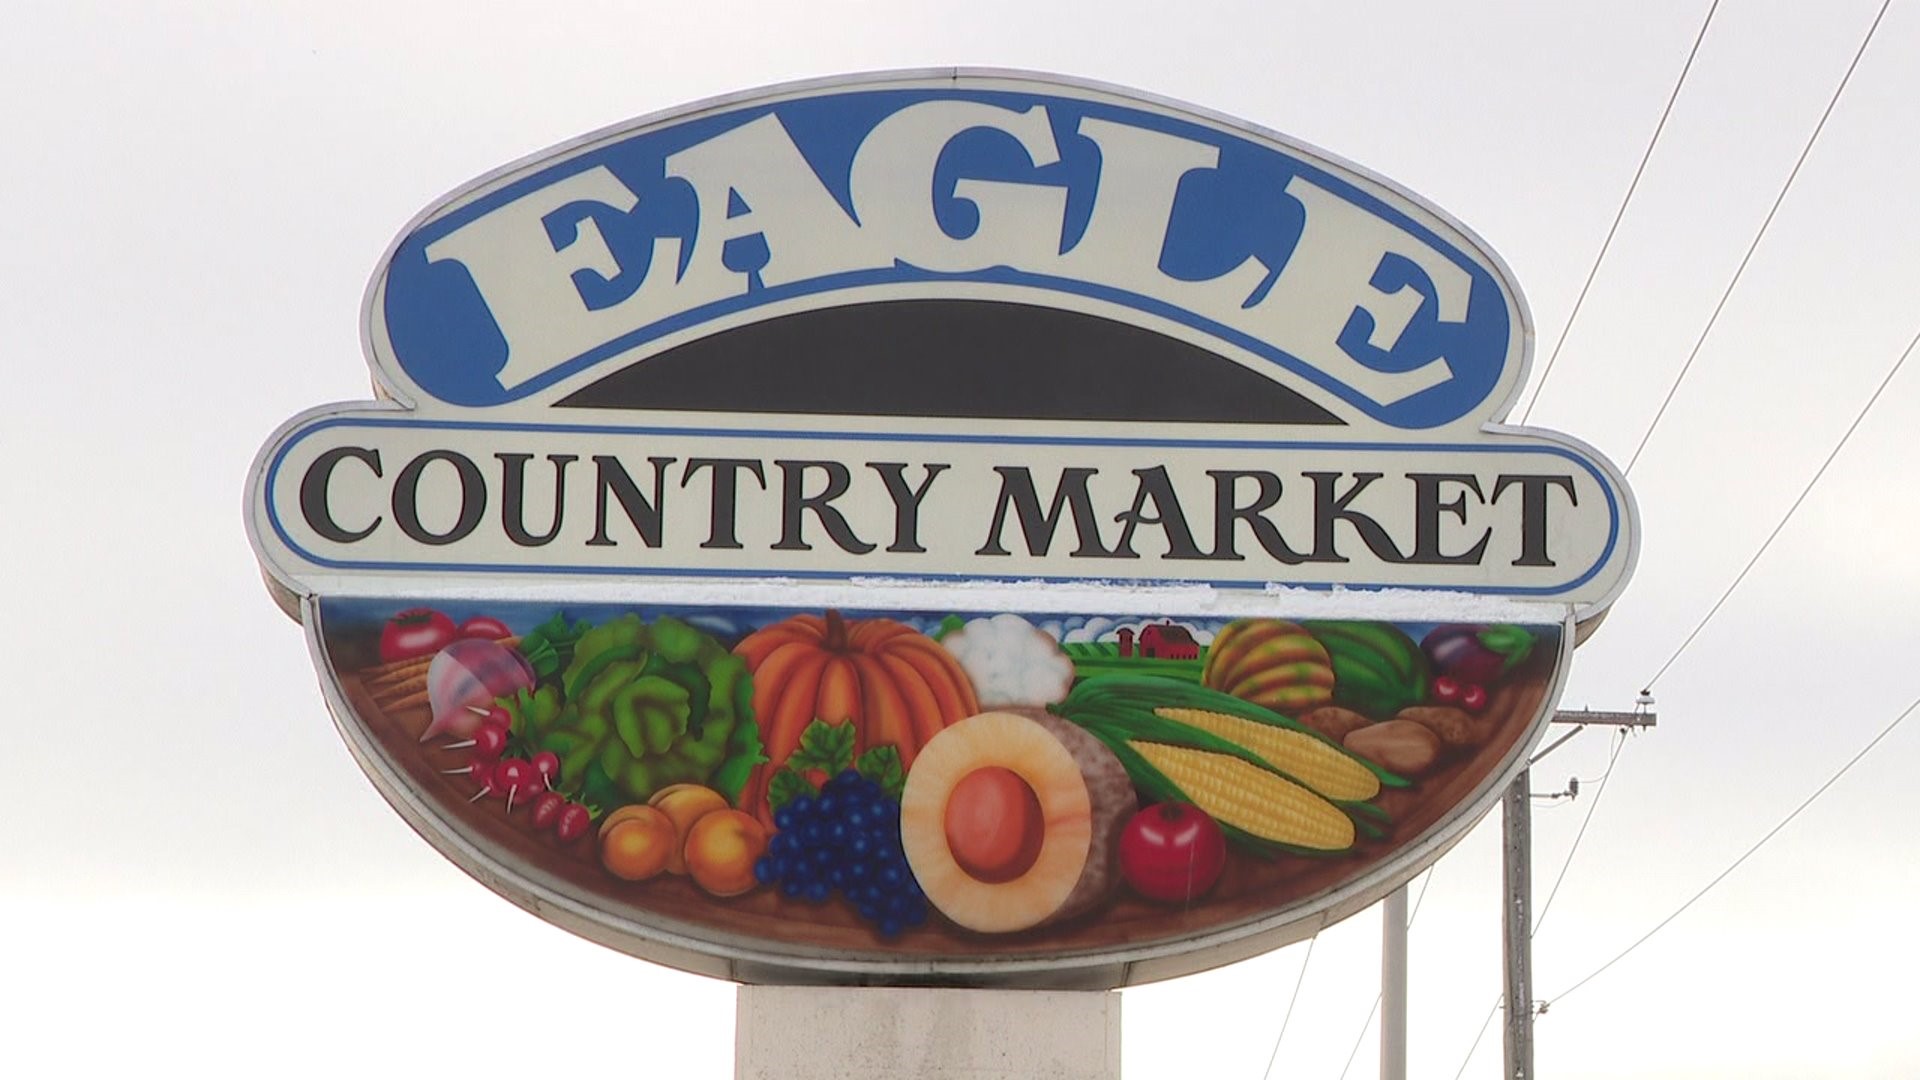 Eagles grocery store is still open